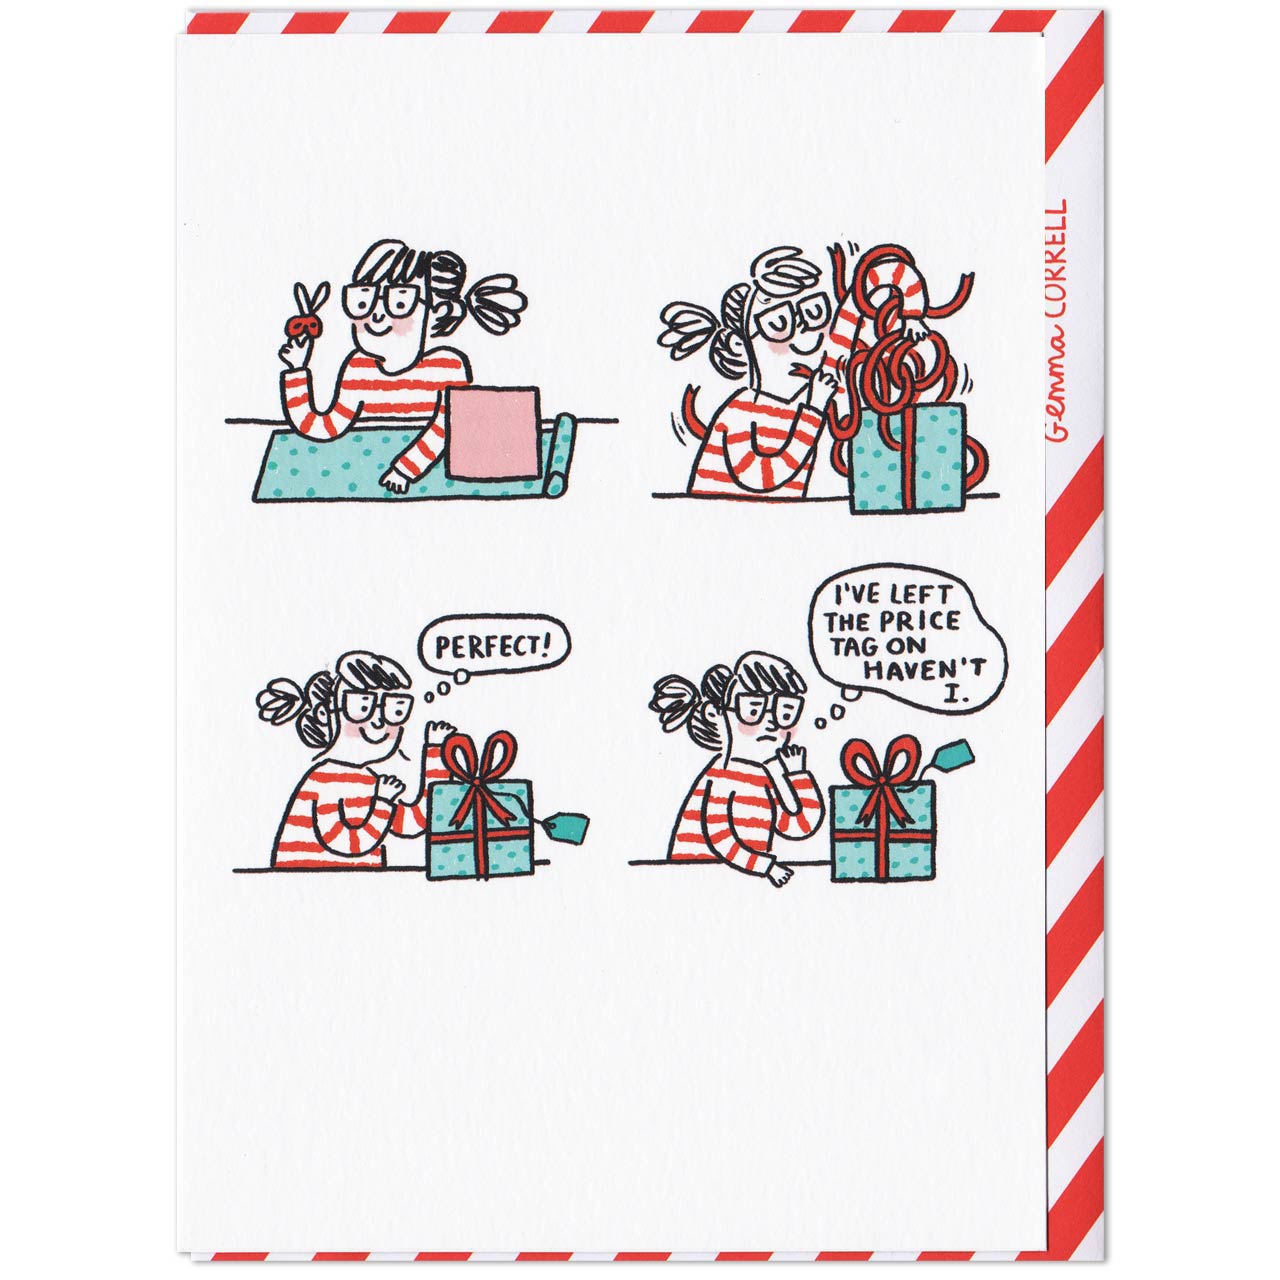 Wrapping Presents at Christmas Card